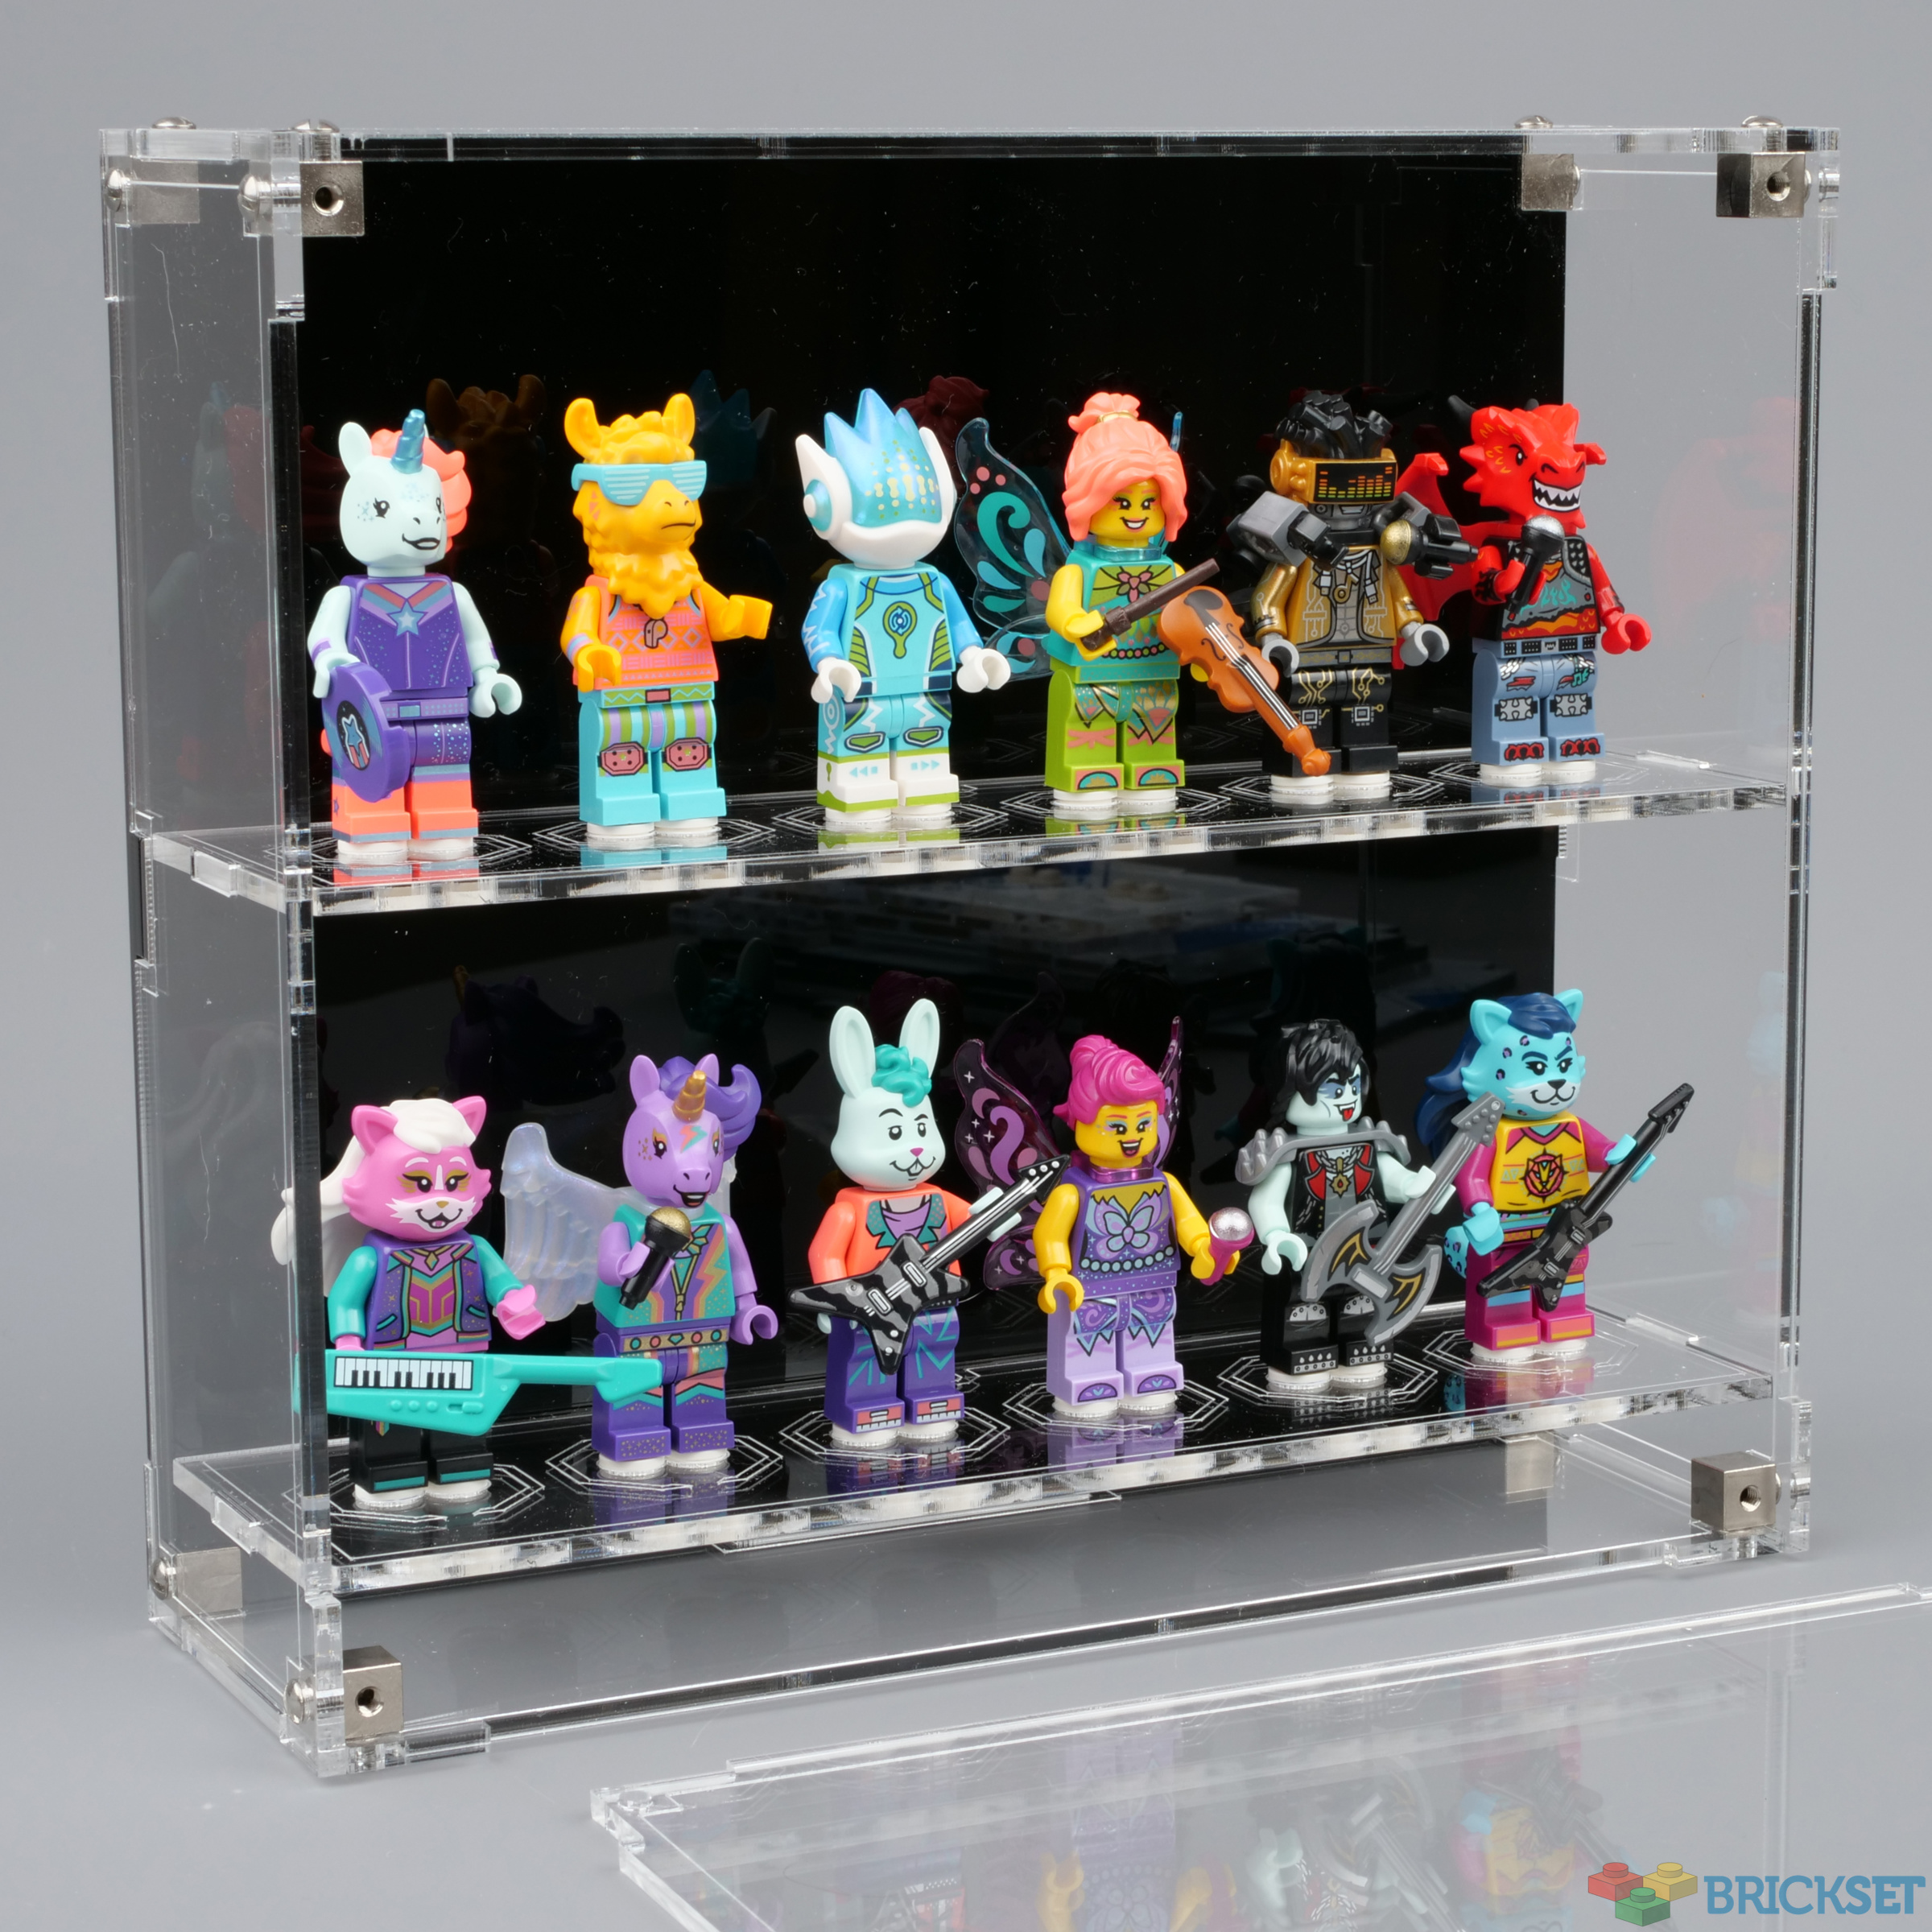 LEGO Wicked Brick wall mounted minifig display cases review | Brickset